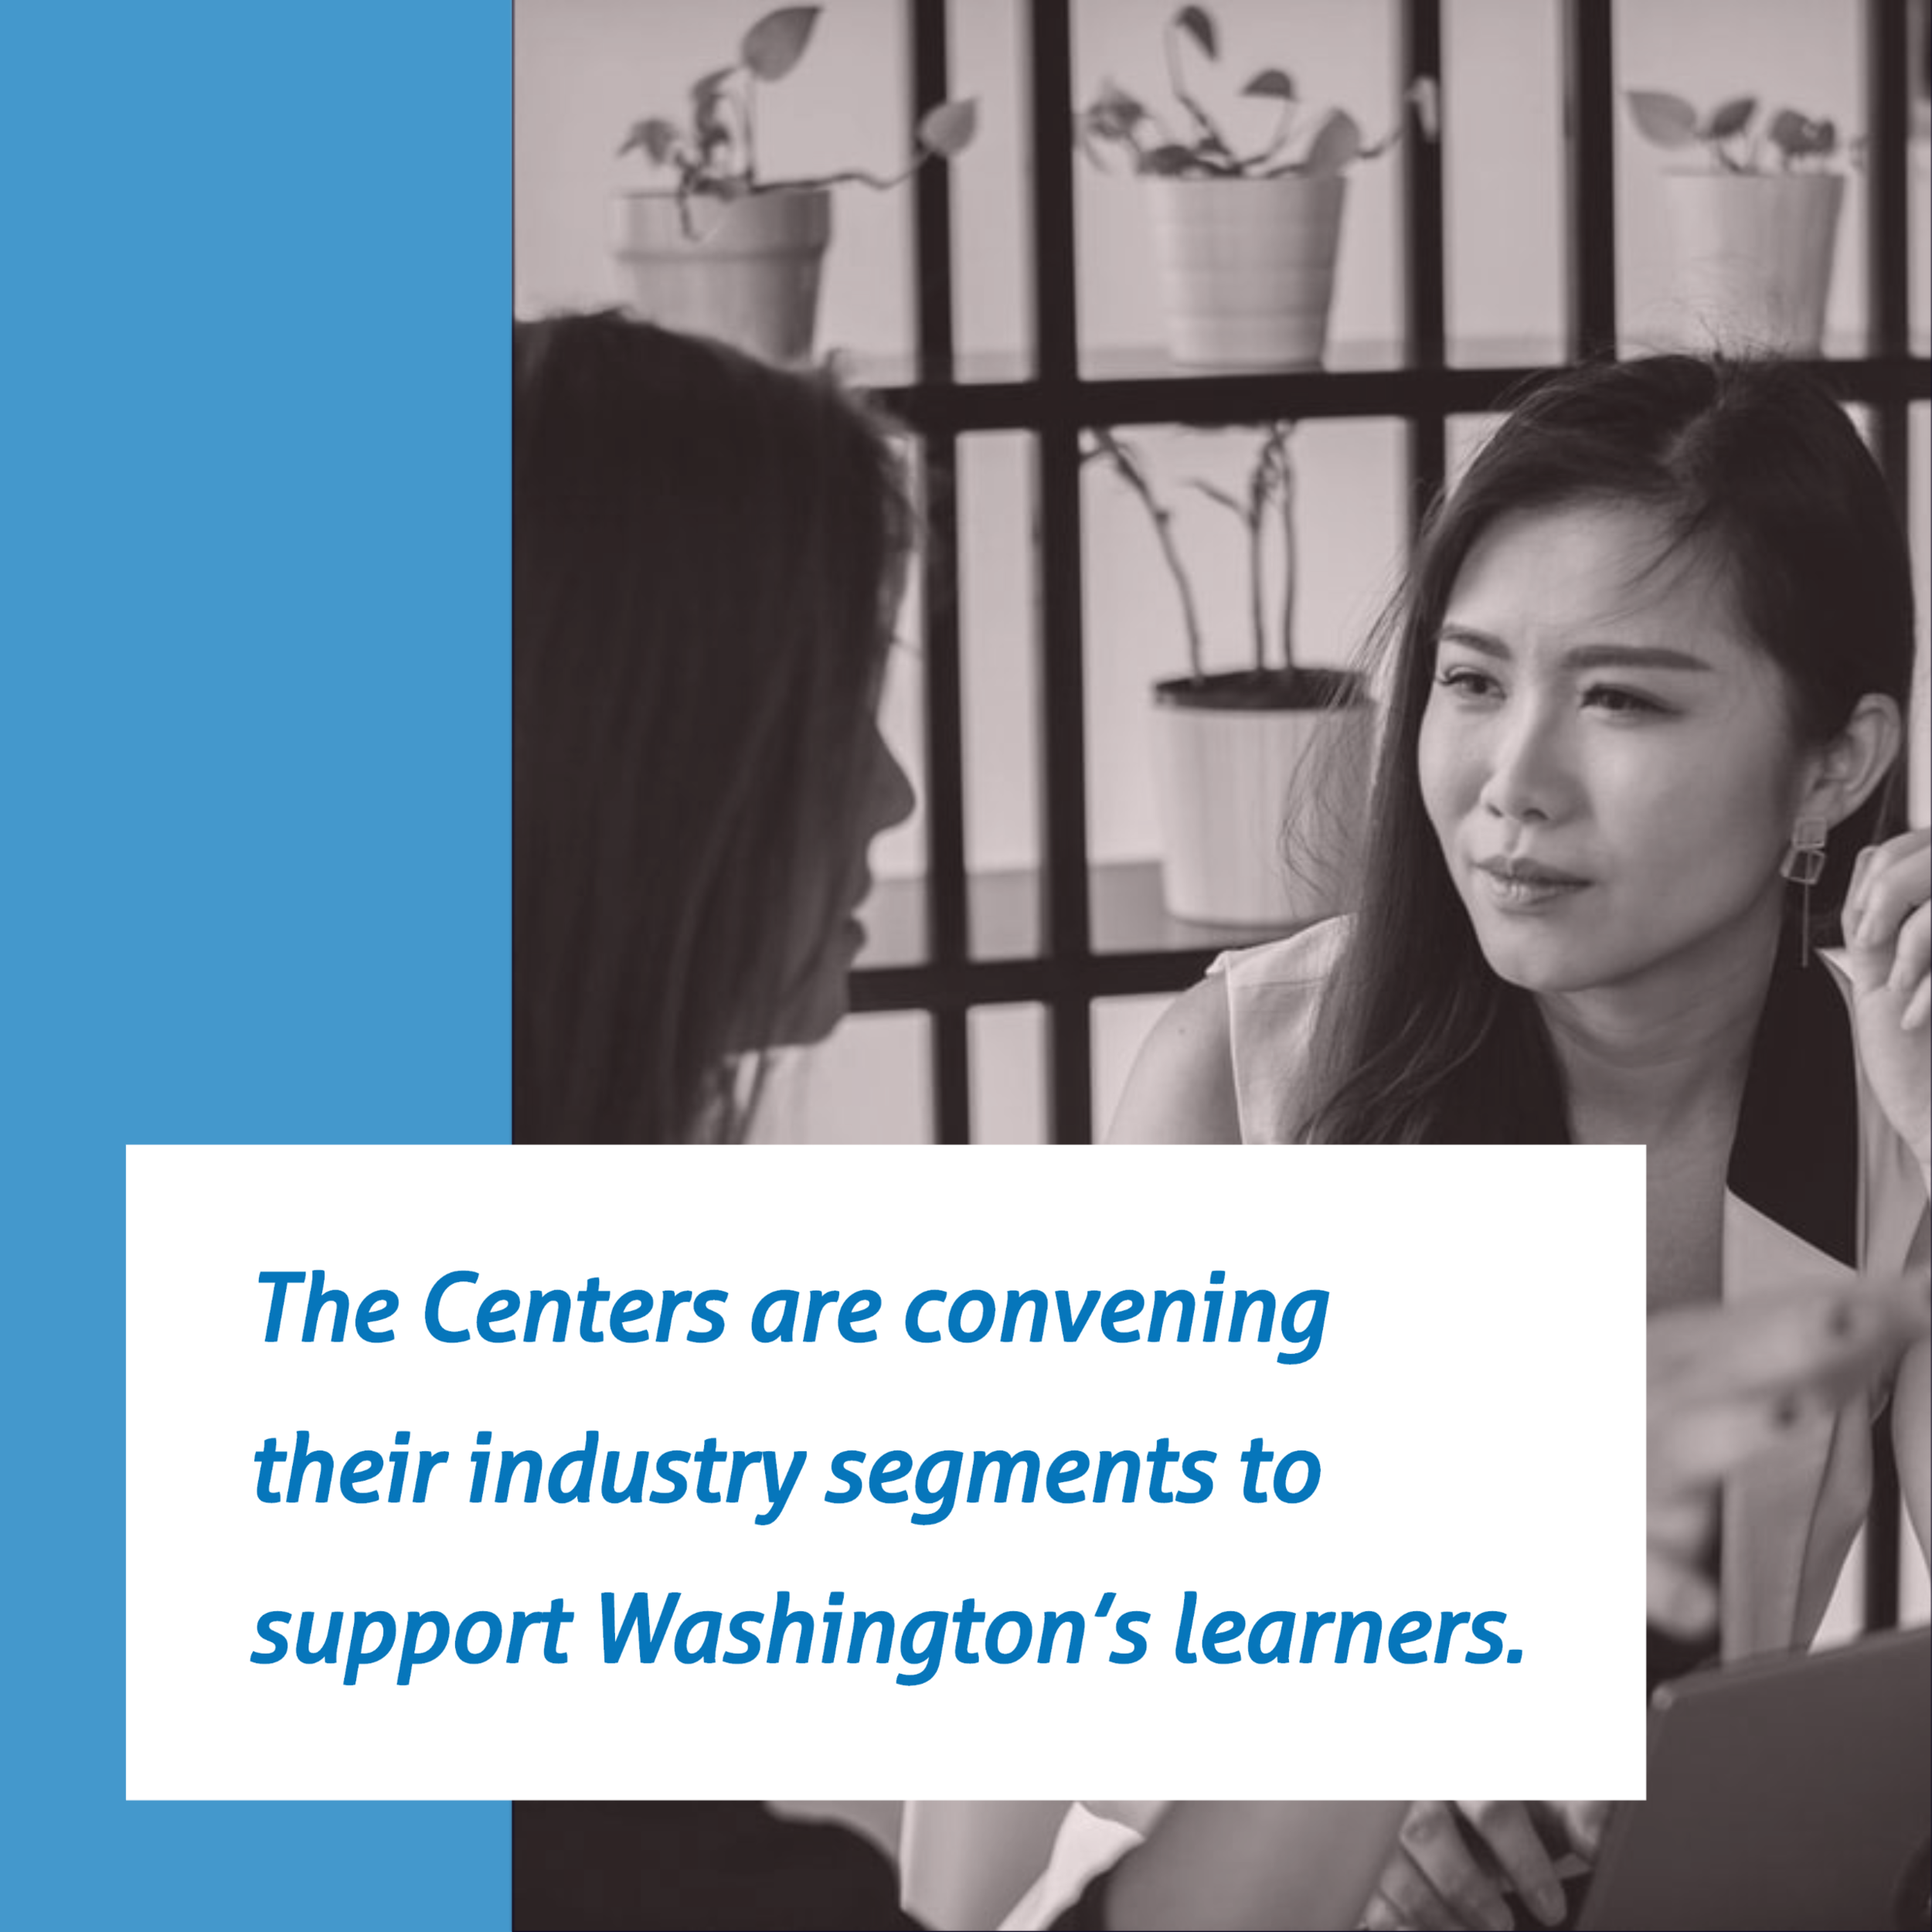 The Centers are convening their industry segments to support Washington's learners